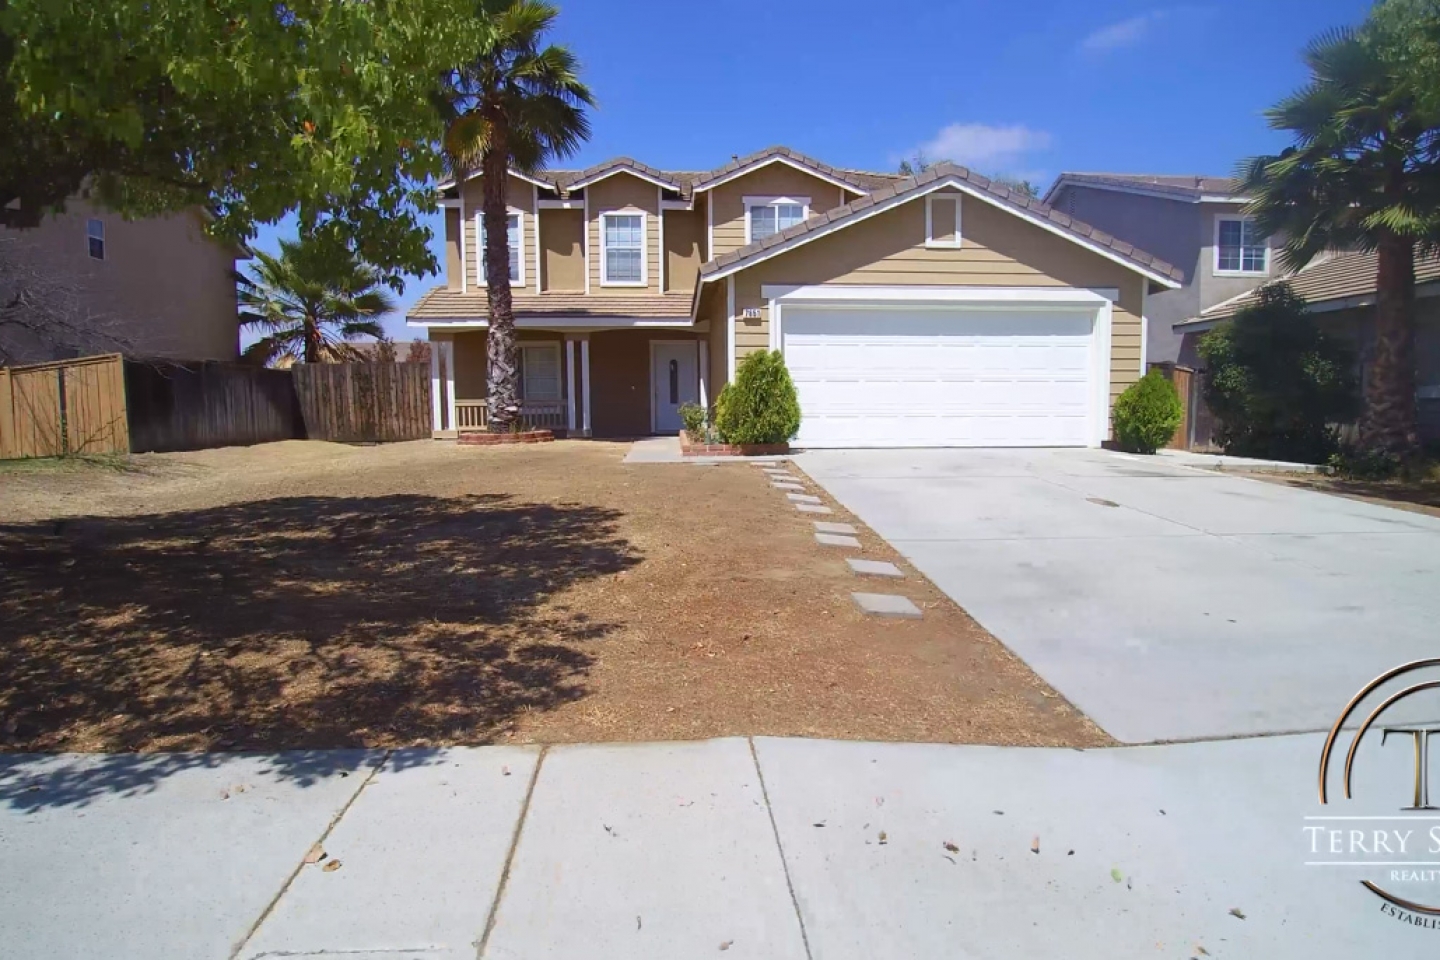 HOME FOR SALE IN RIVERSIDE CA 92508 BY REAL ESTATE BROKER TERRY SANCHEZ $430,000 WITH 5 BEDROOMS 4 BATHROOMS